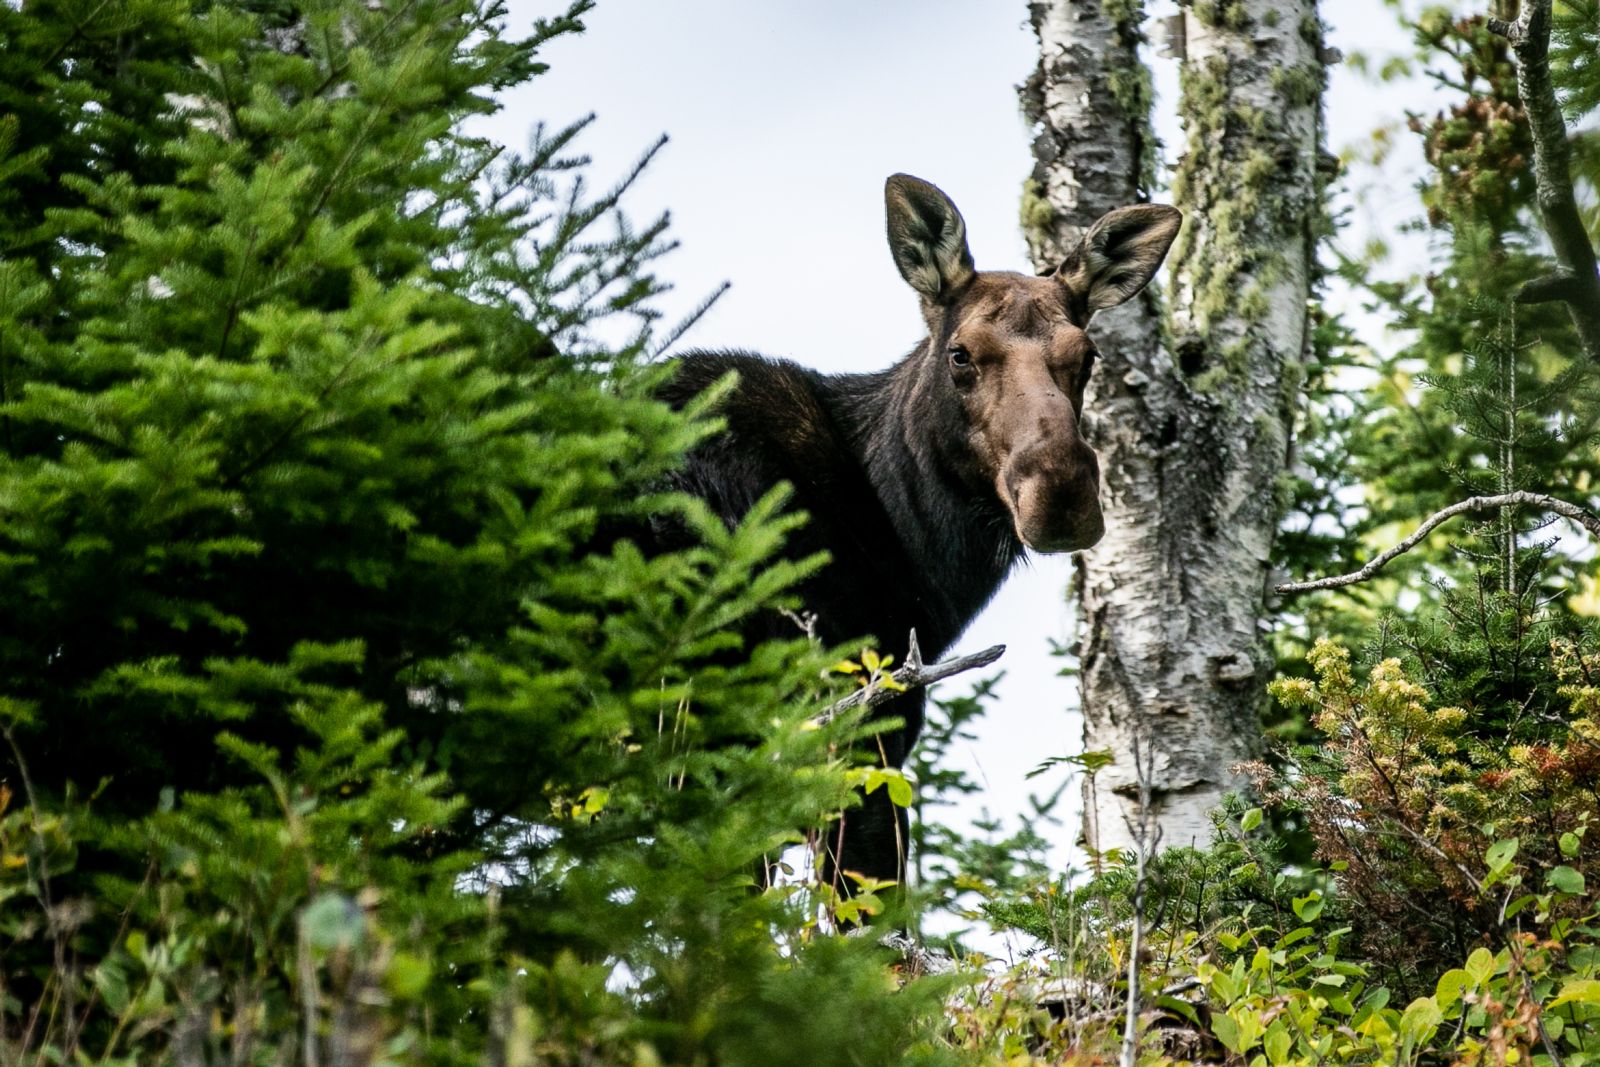 Moose in Isle Royale National Park - photo by Amie Heeter